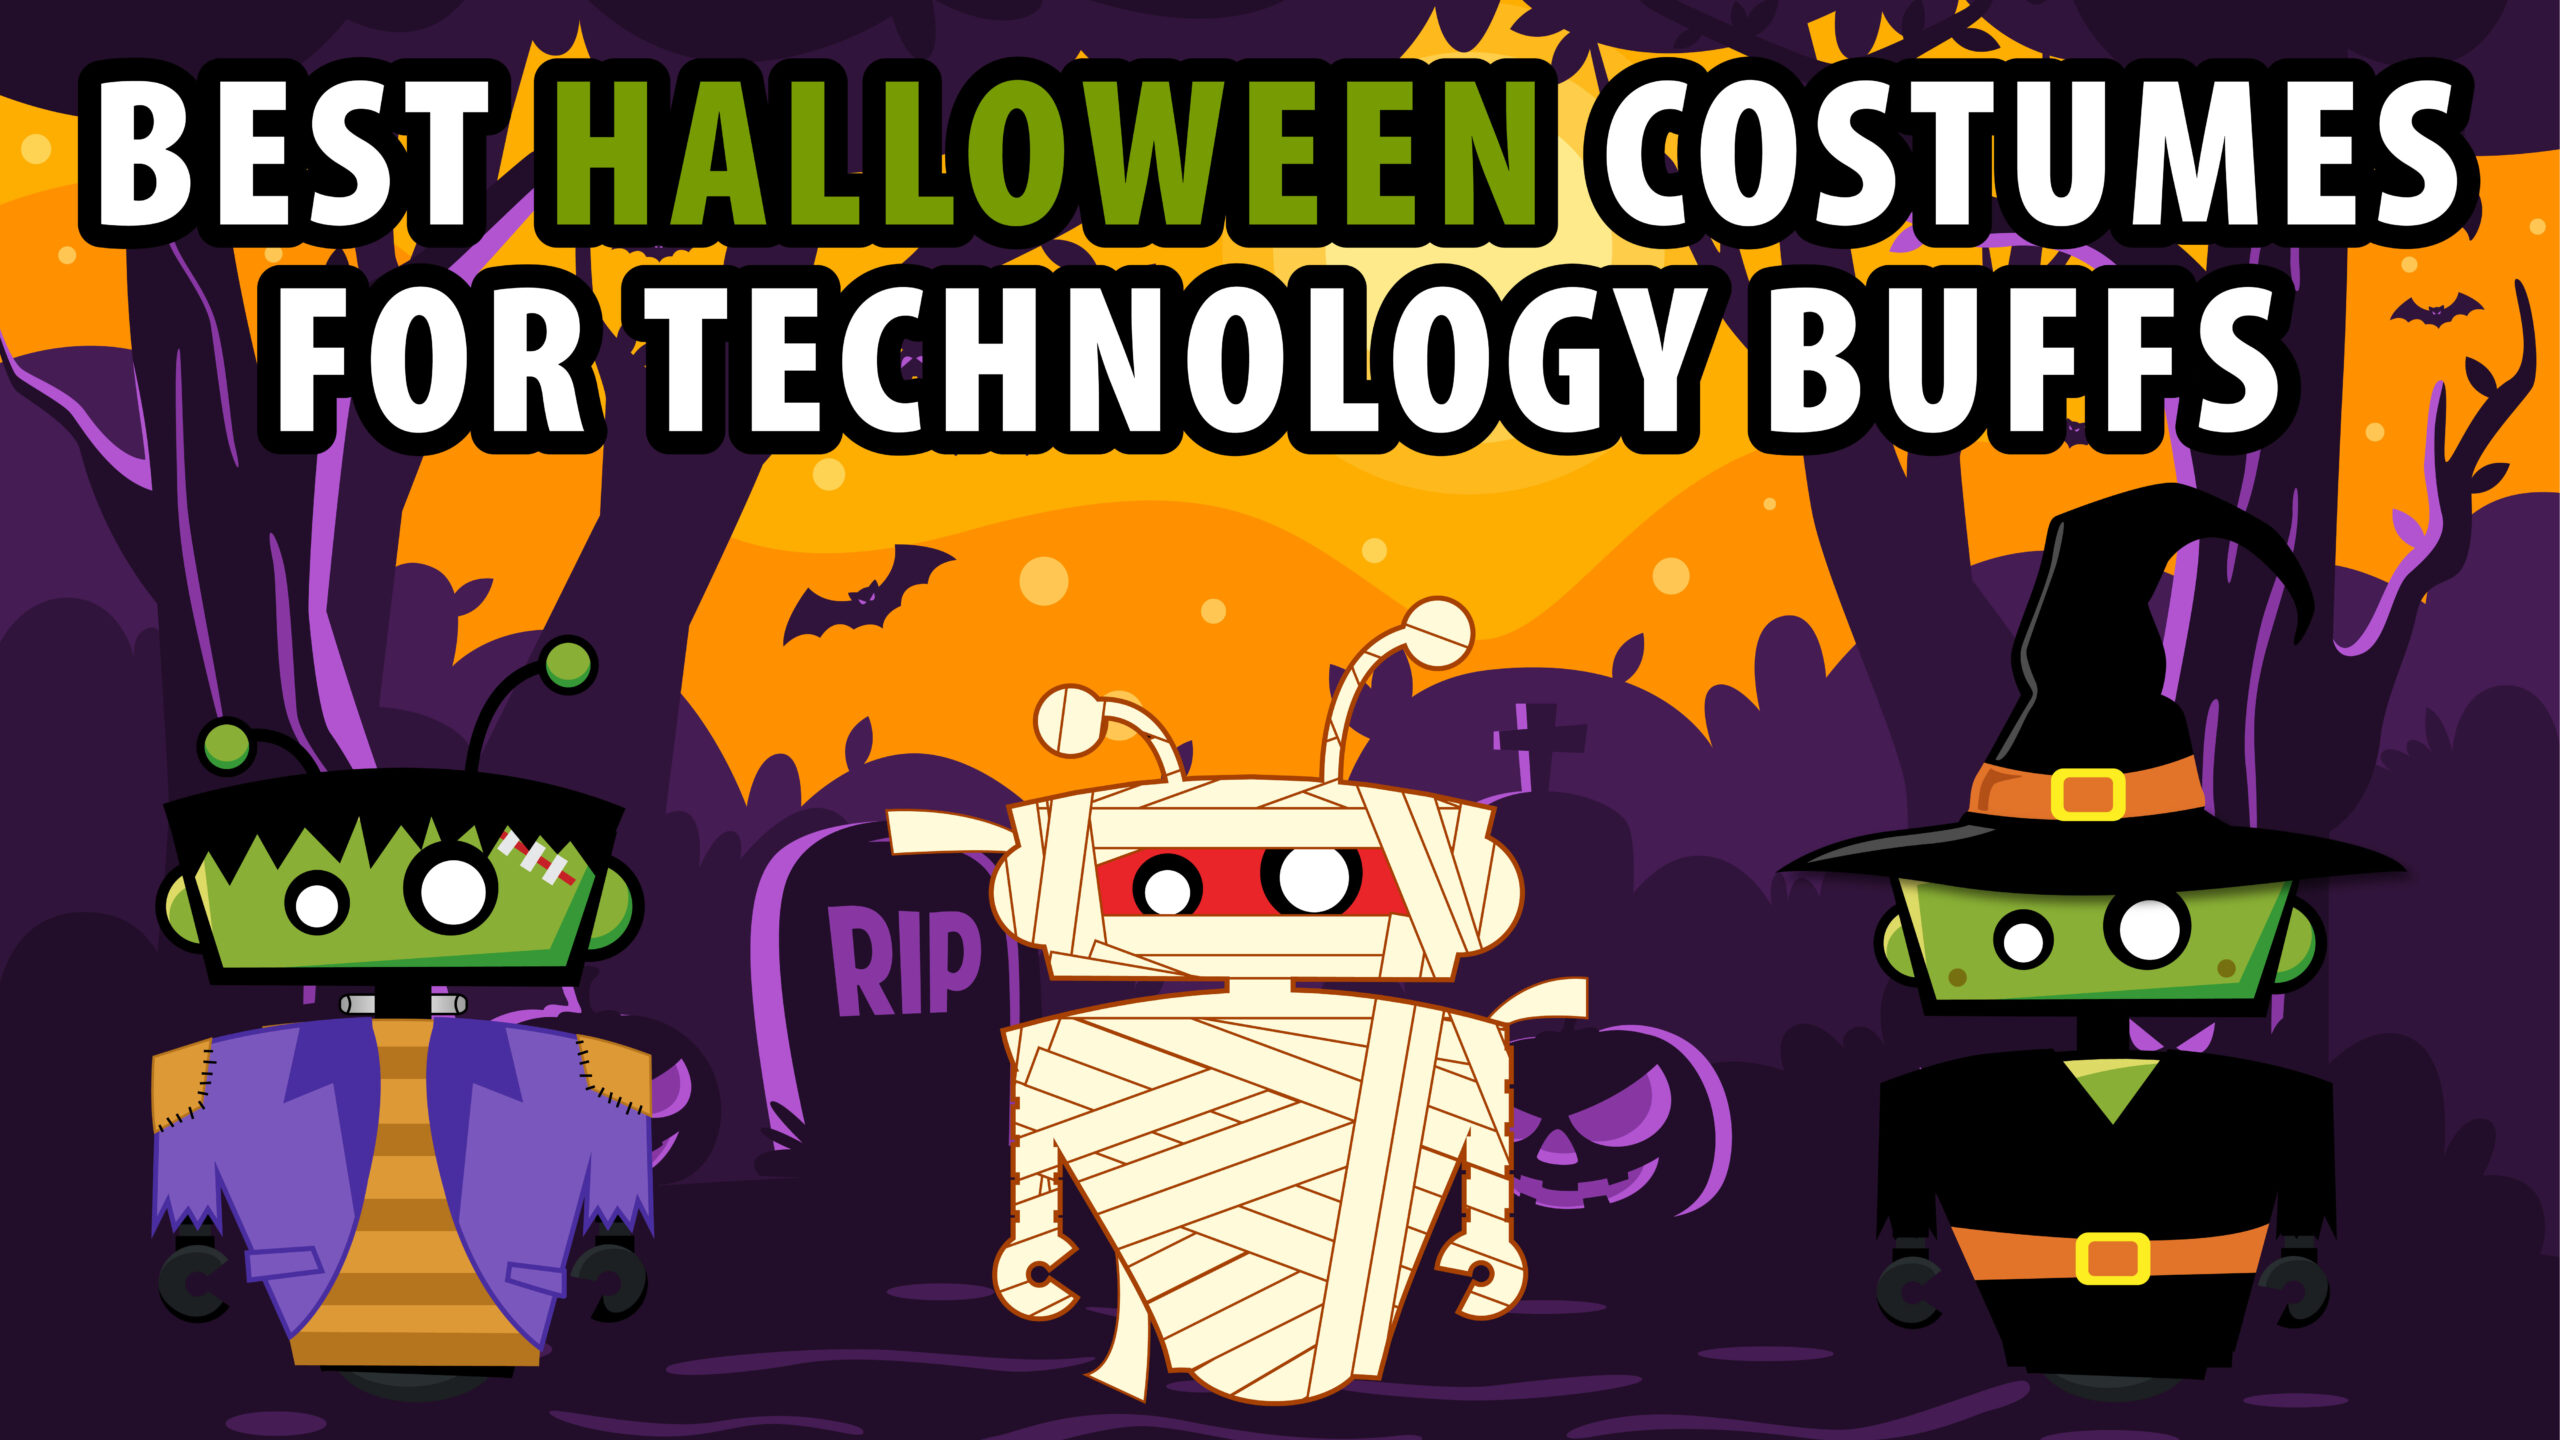 Tech-or-Treat! Halloween Costume Ideas for IT and Tech Lovers